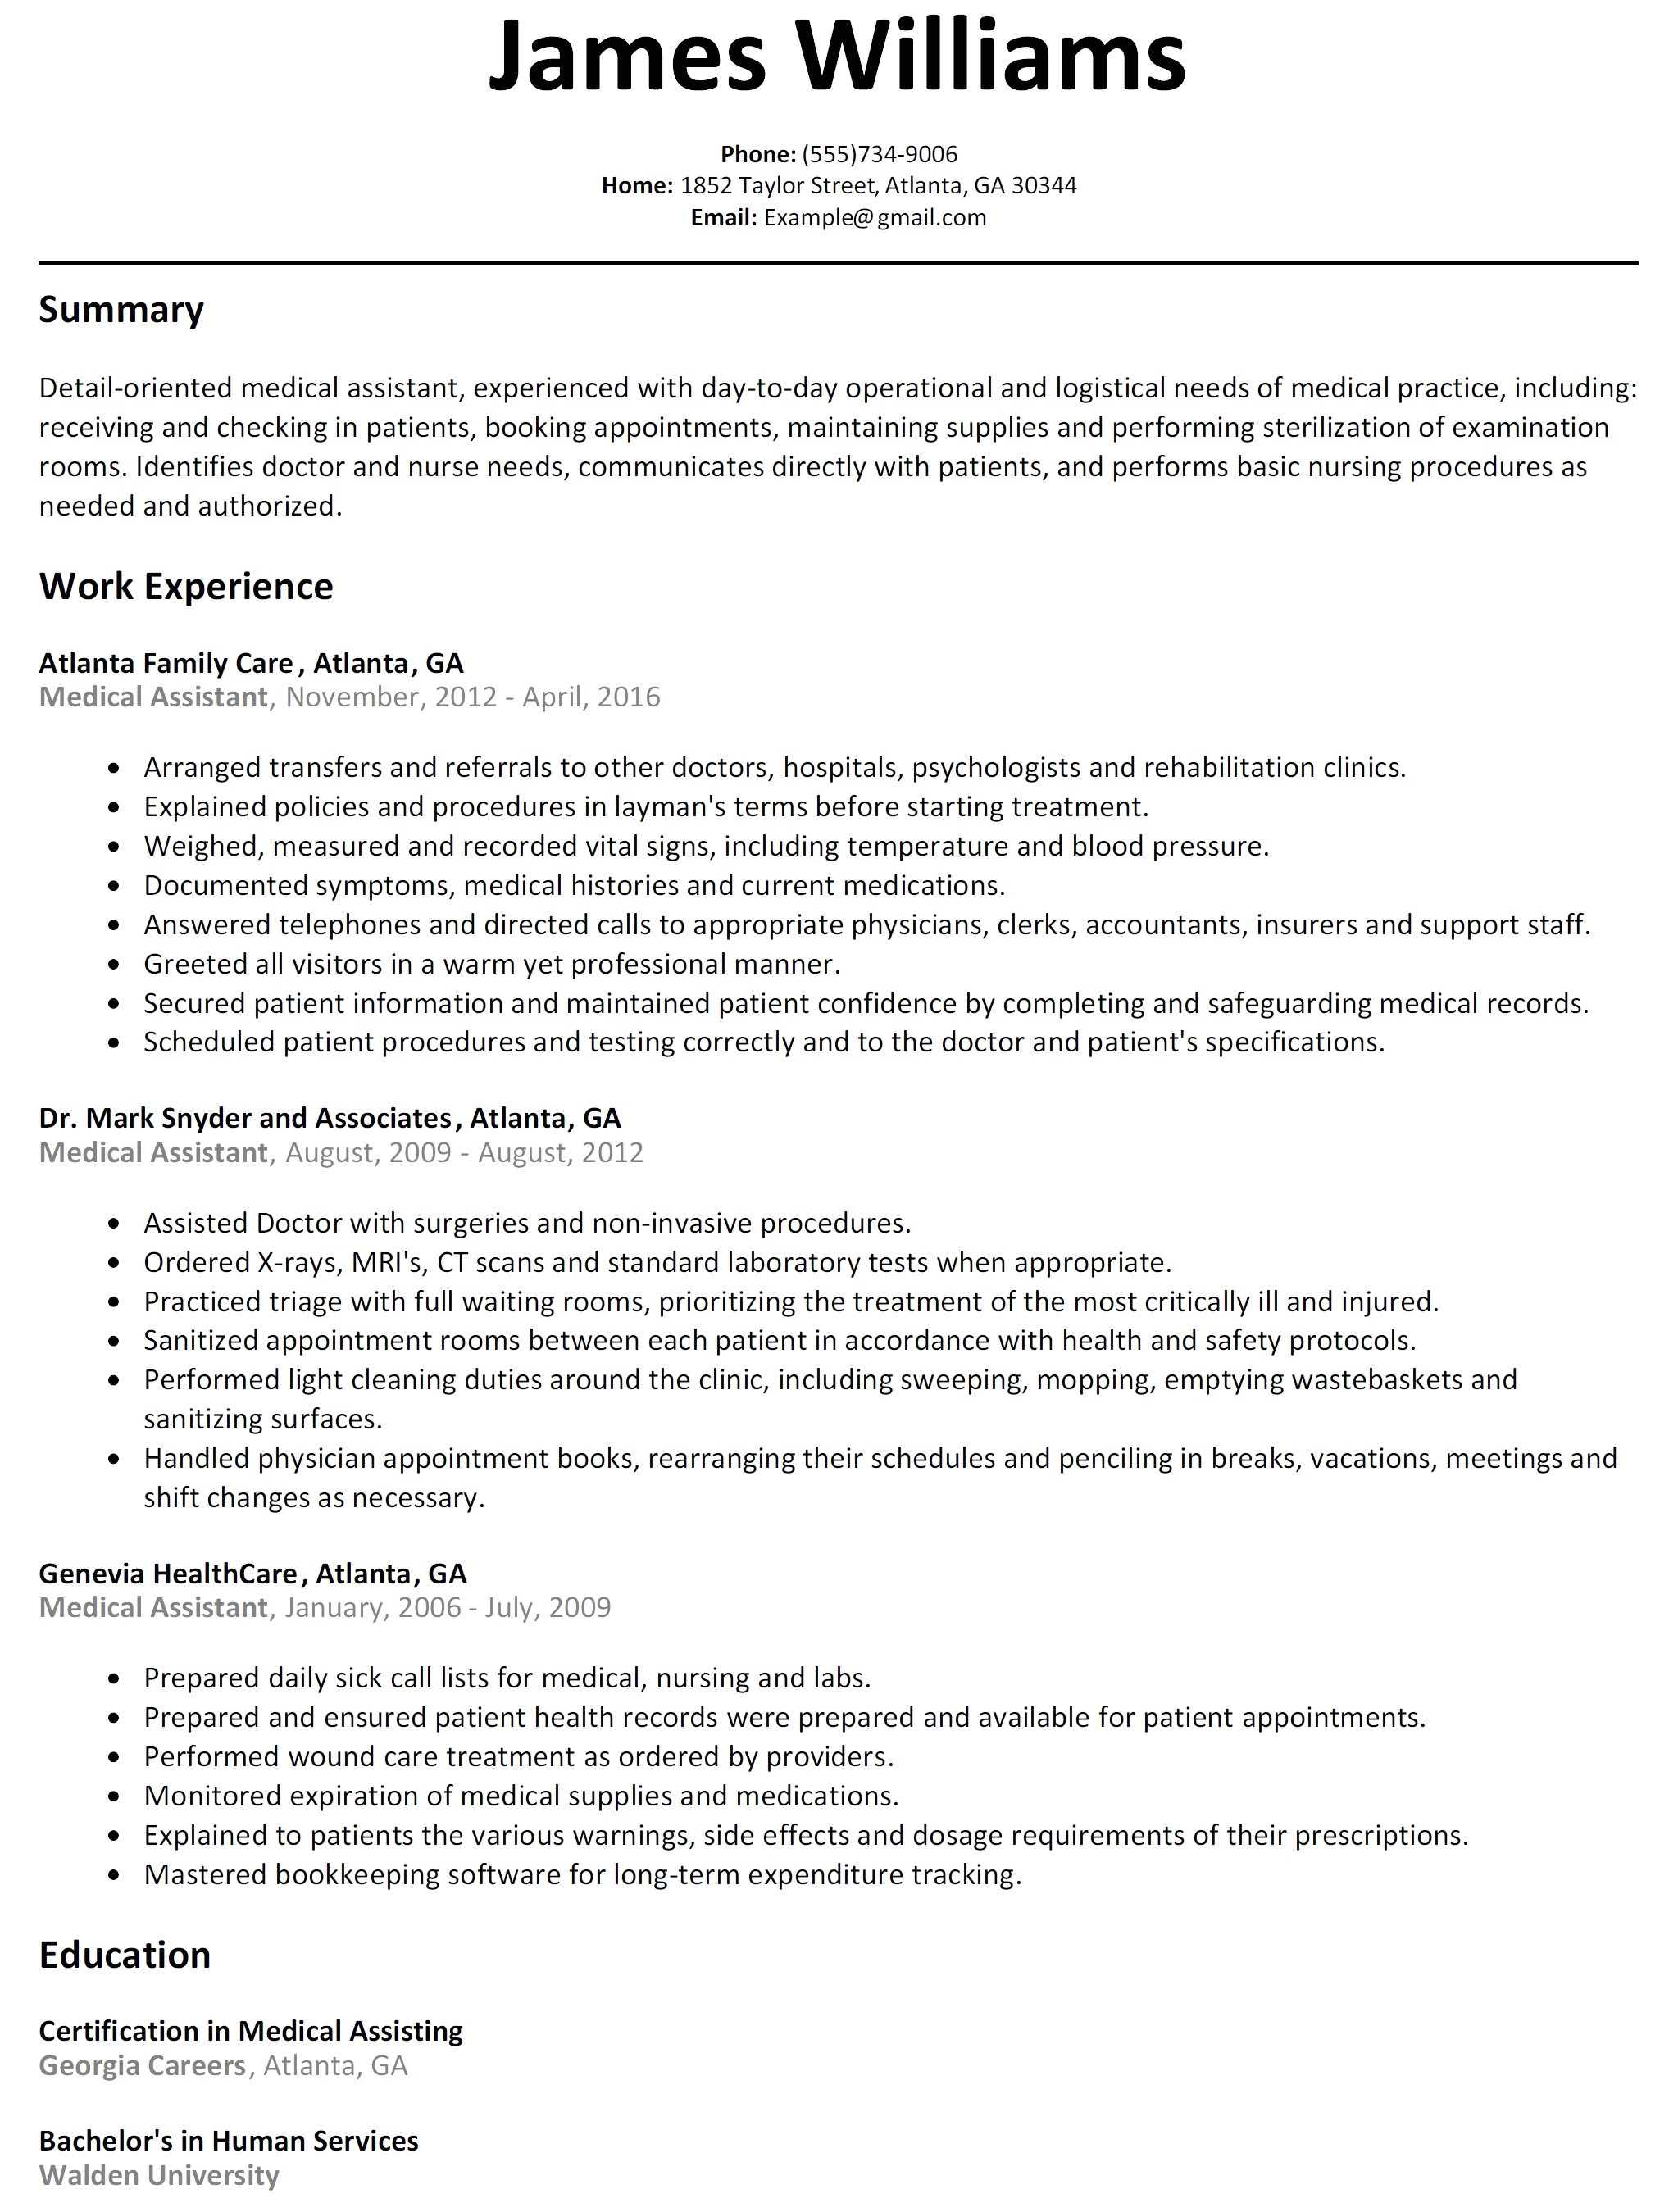 what font should i use for my resume